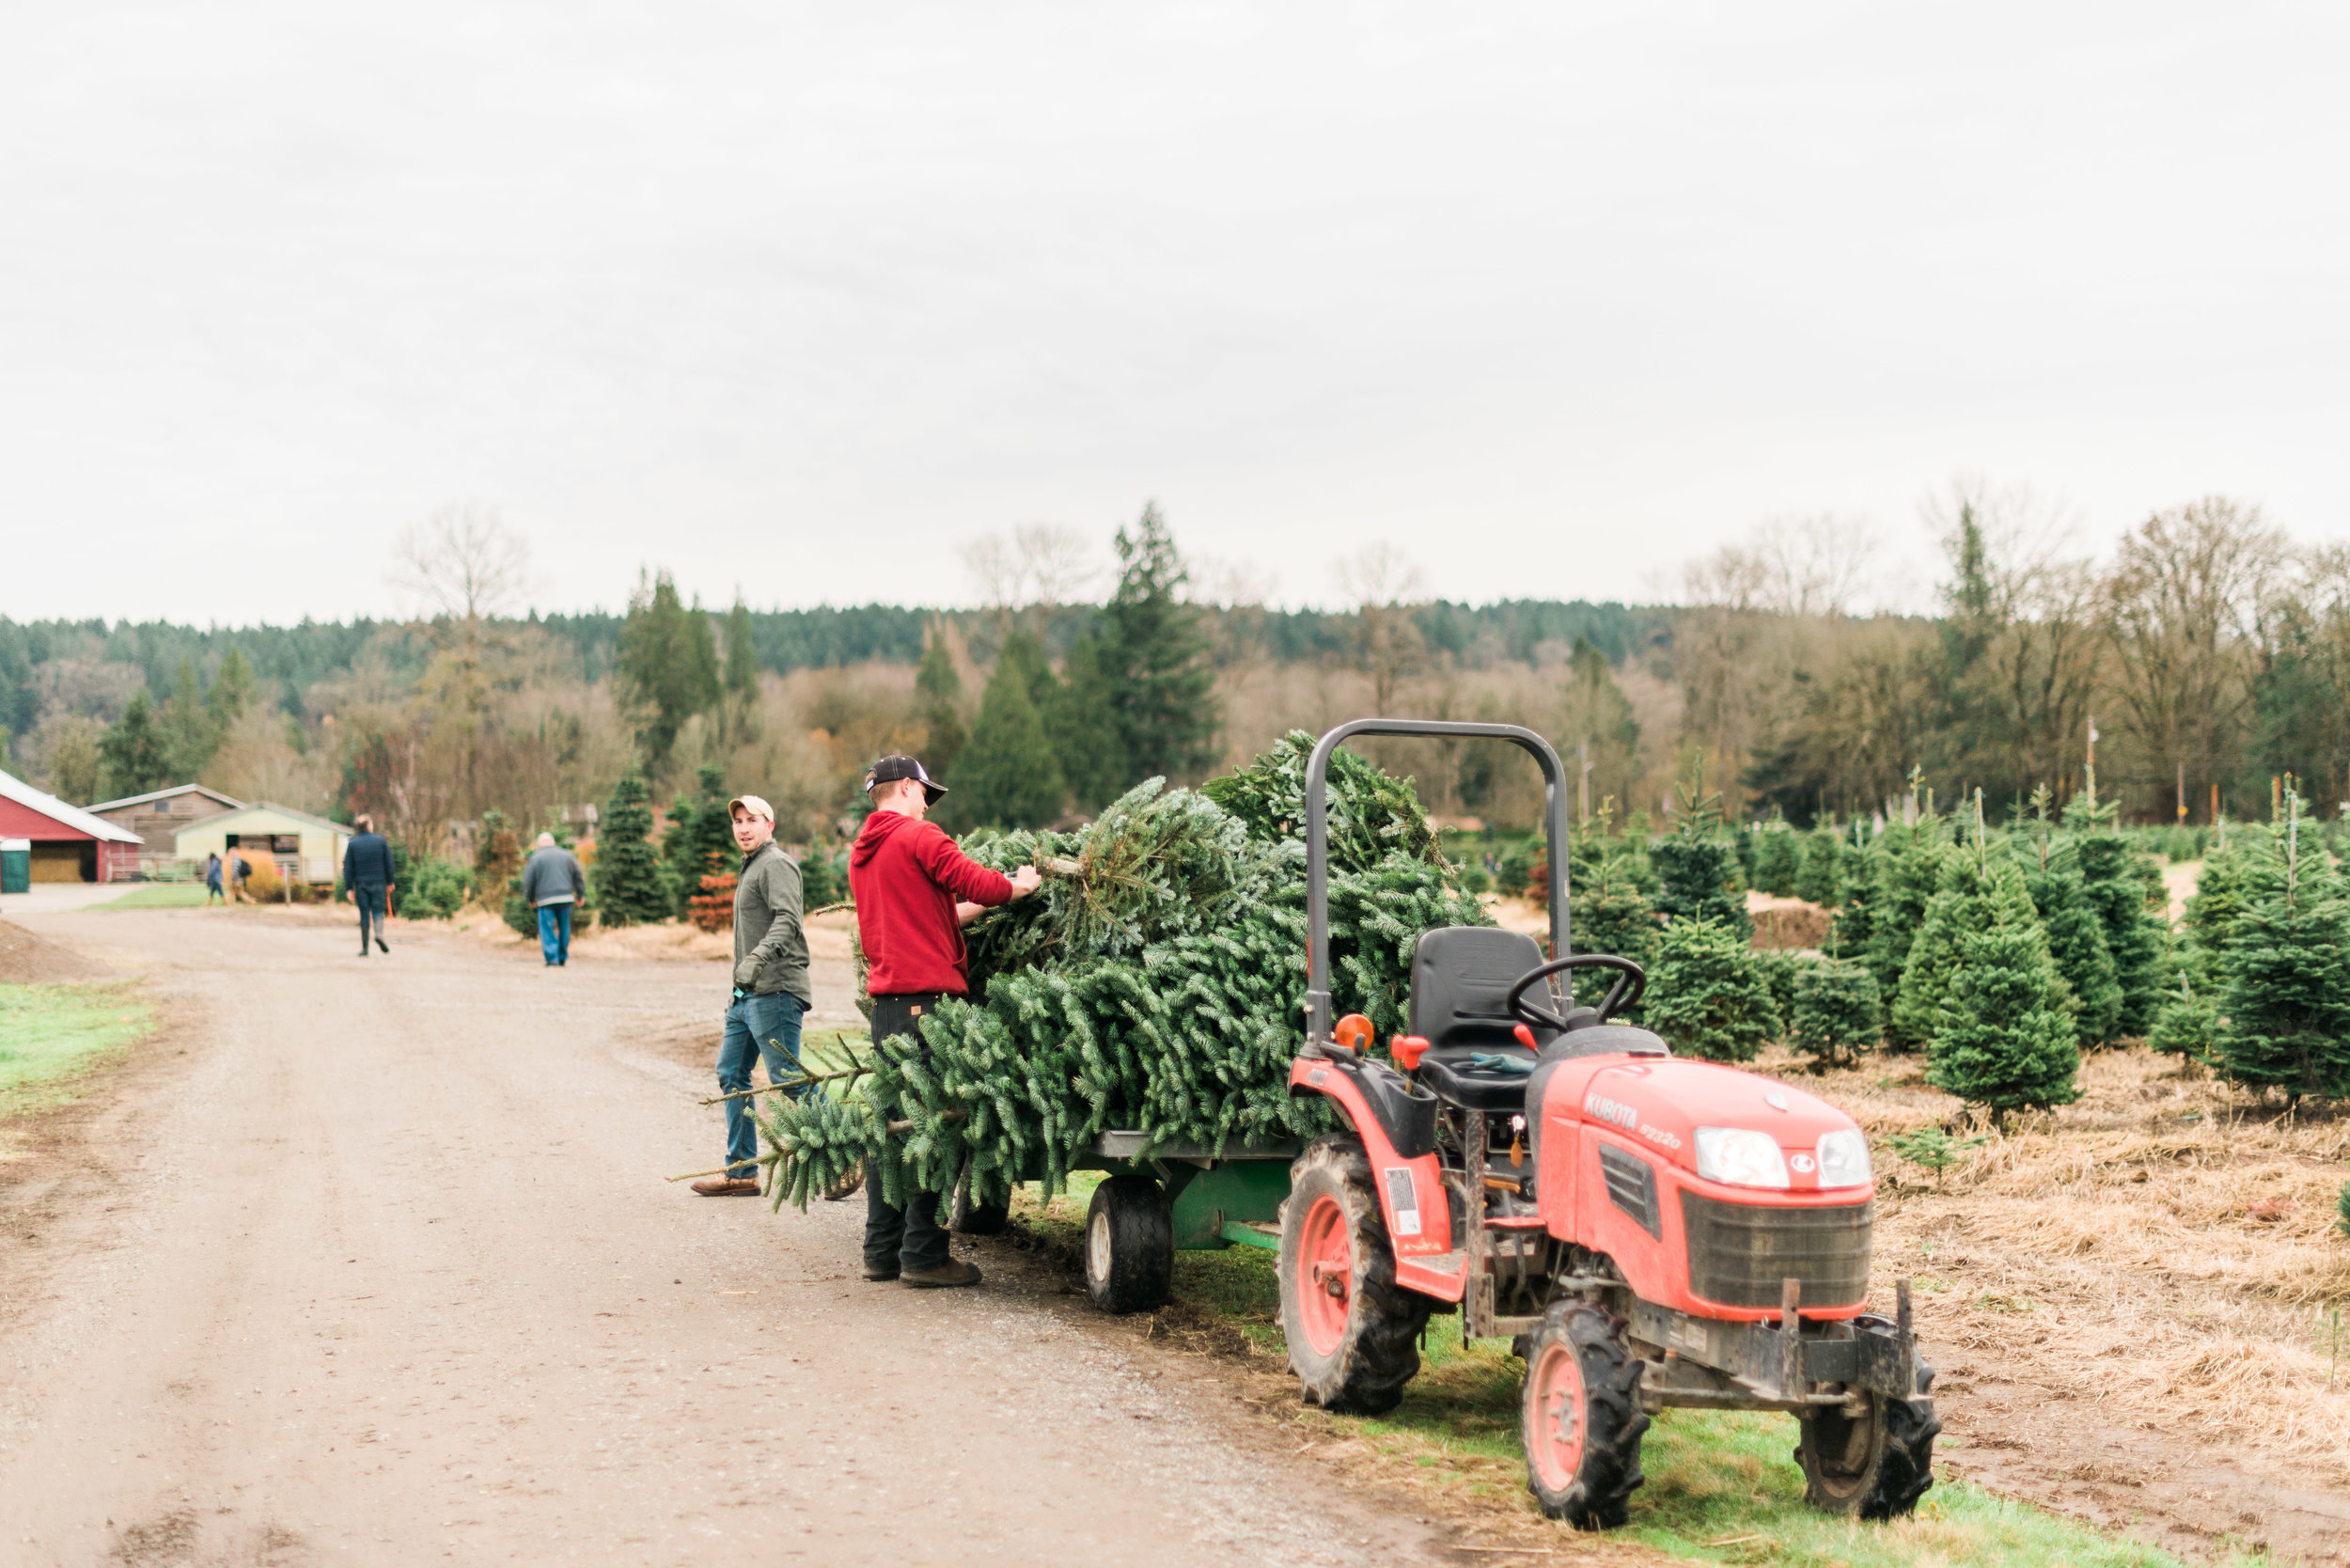 Brooke Summers Photography | The Great Christmas Tree Hunt